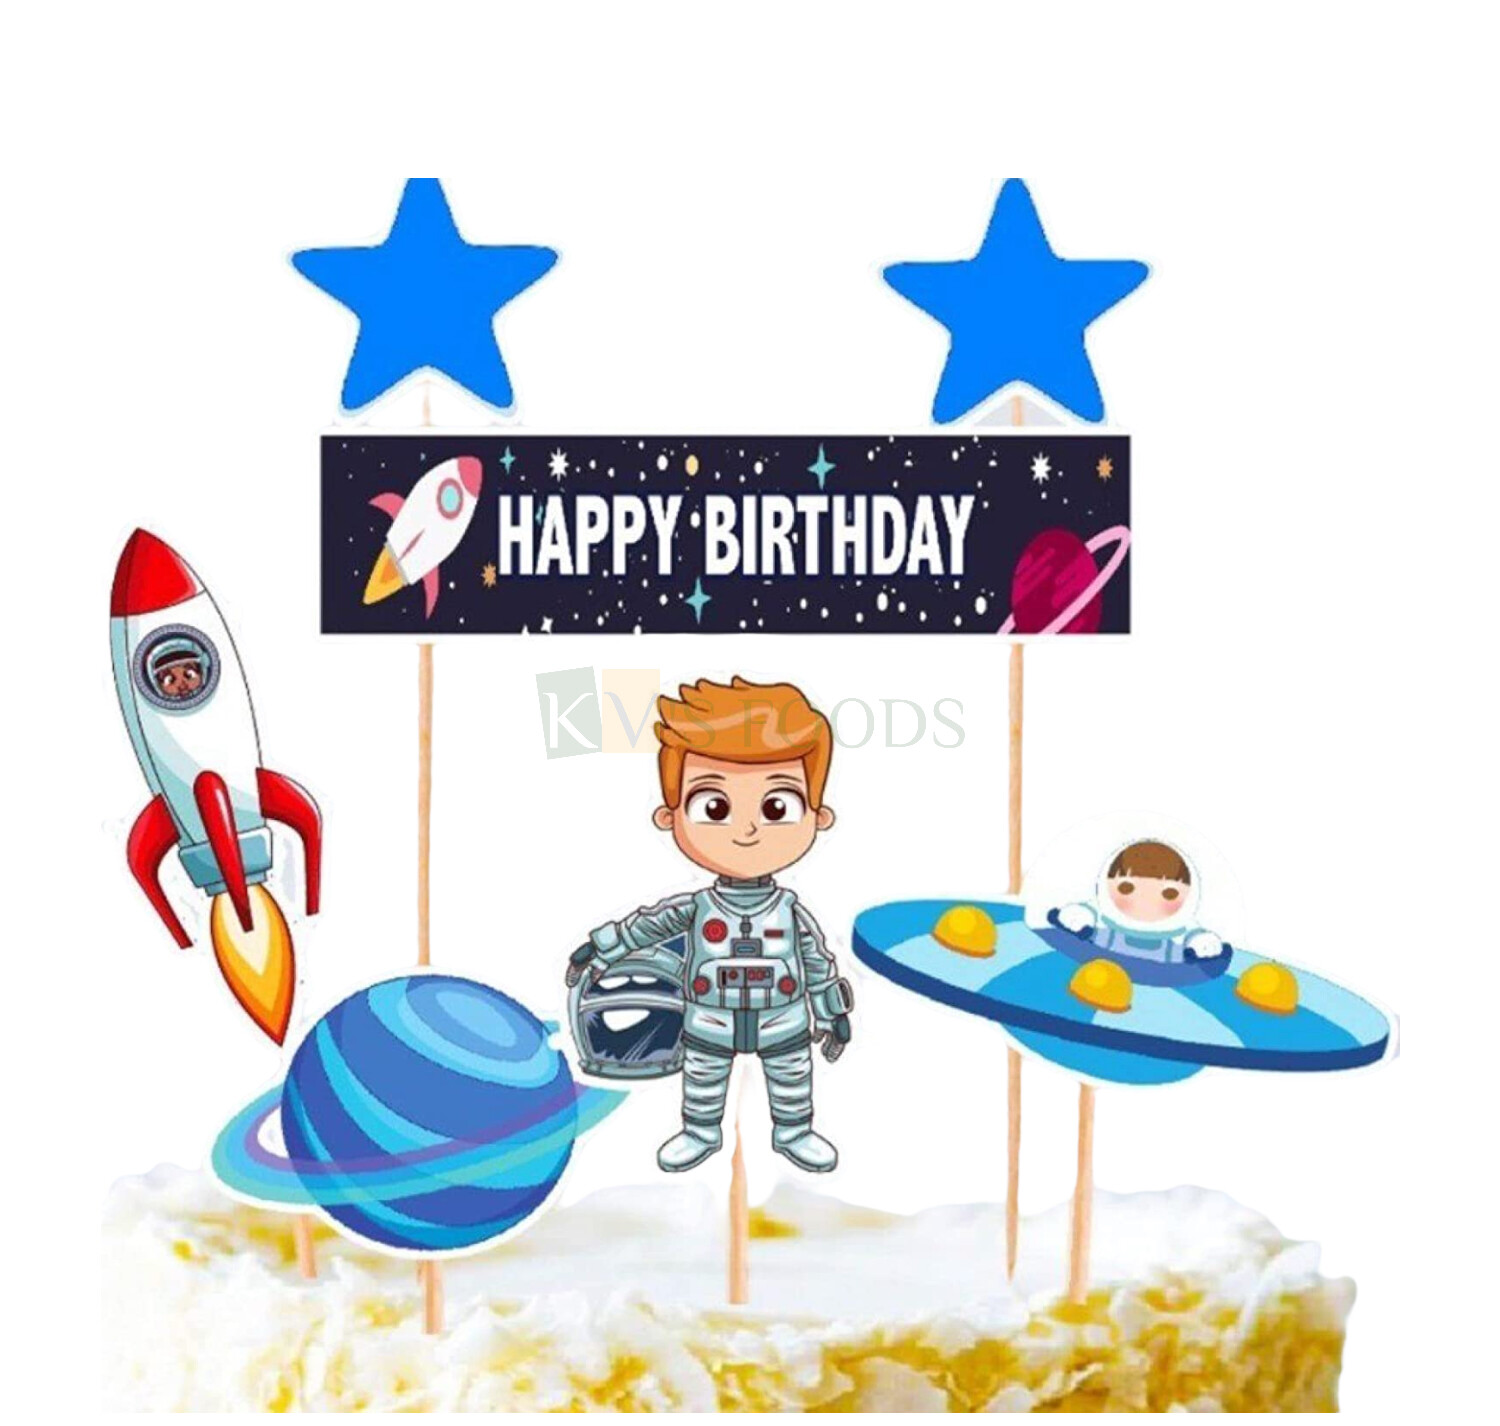 5 PC Astronaut Boy, Spaceship, Stars, Space & Planets Theme, Home Cake Topper Insert, Cake Topper, Cupcake Toppers Bday, Decorations Items/Cake Accessories, Tags, Cards, Cake Toothpick Topper